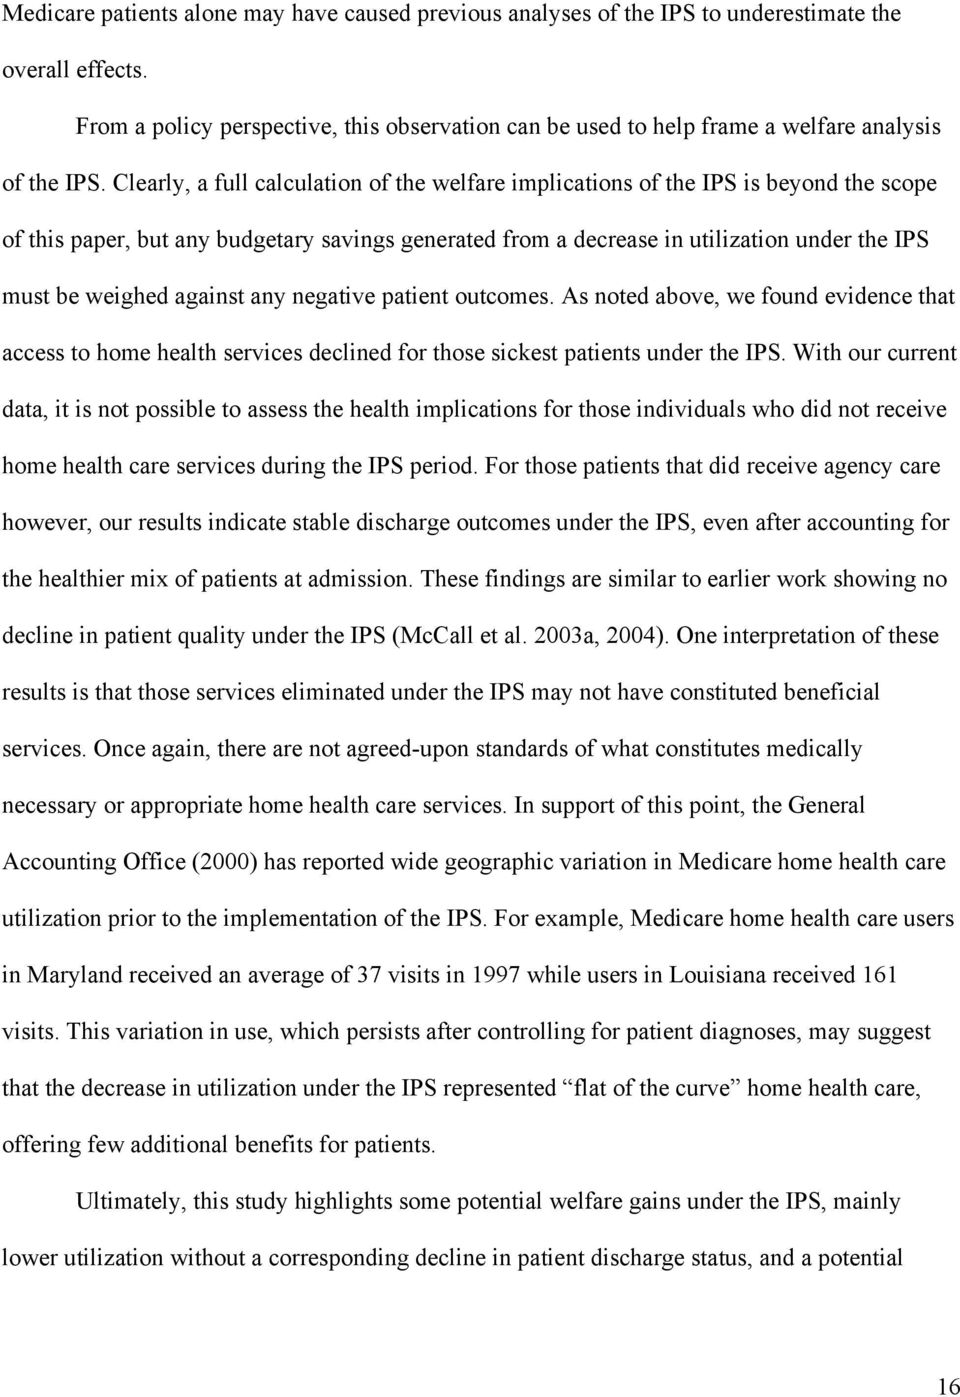 Clearly, a full calculation of the welfare implications of the IPS is beyond the scope of this paper, but any budgetary savings generated from a decrease in utilization under the IPS must be weighed